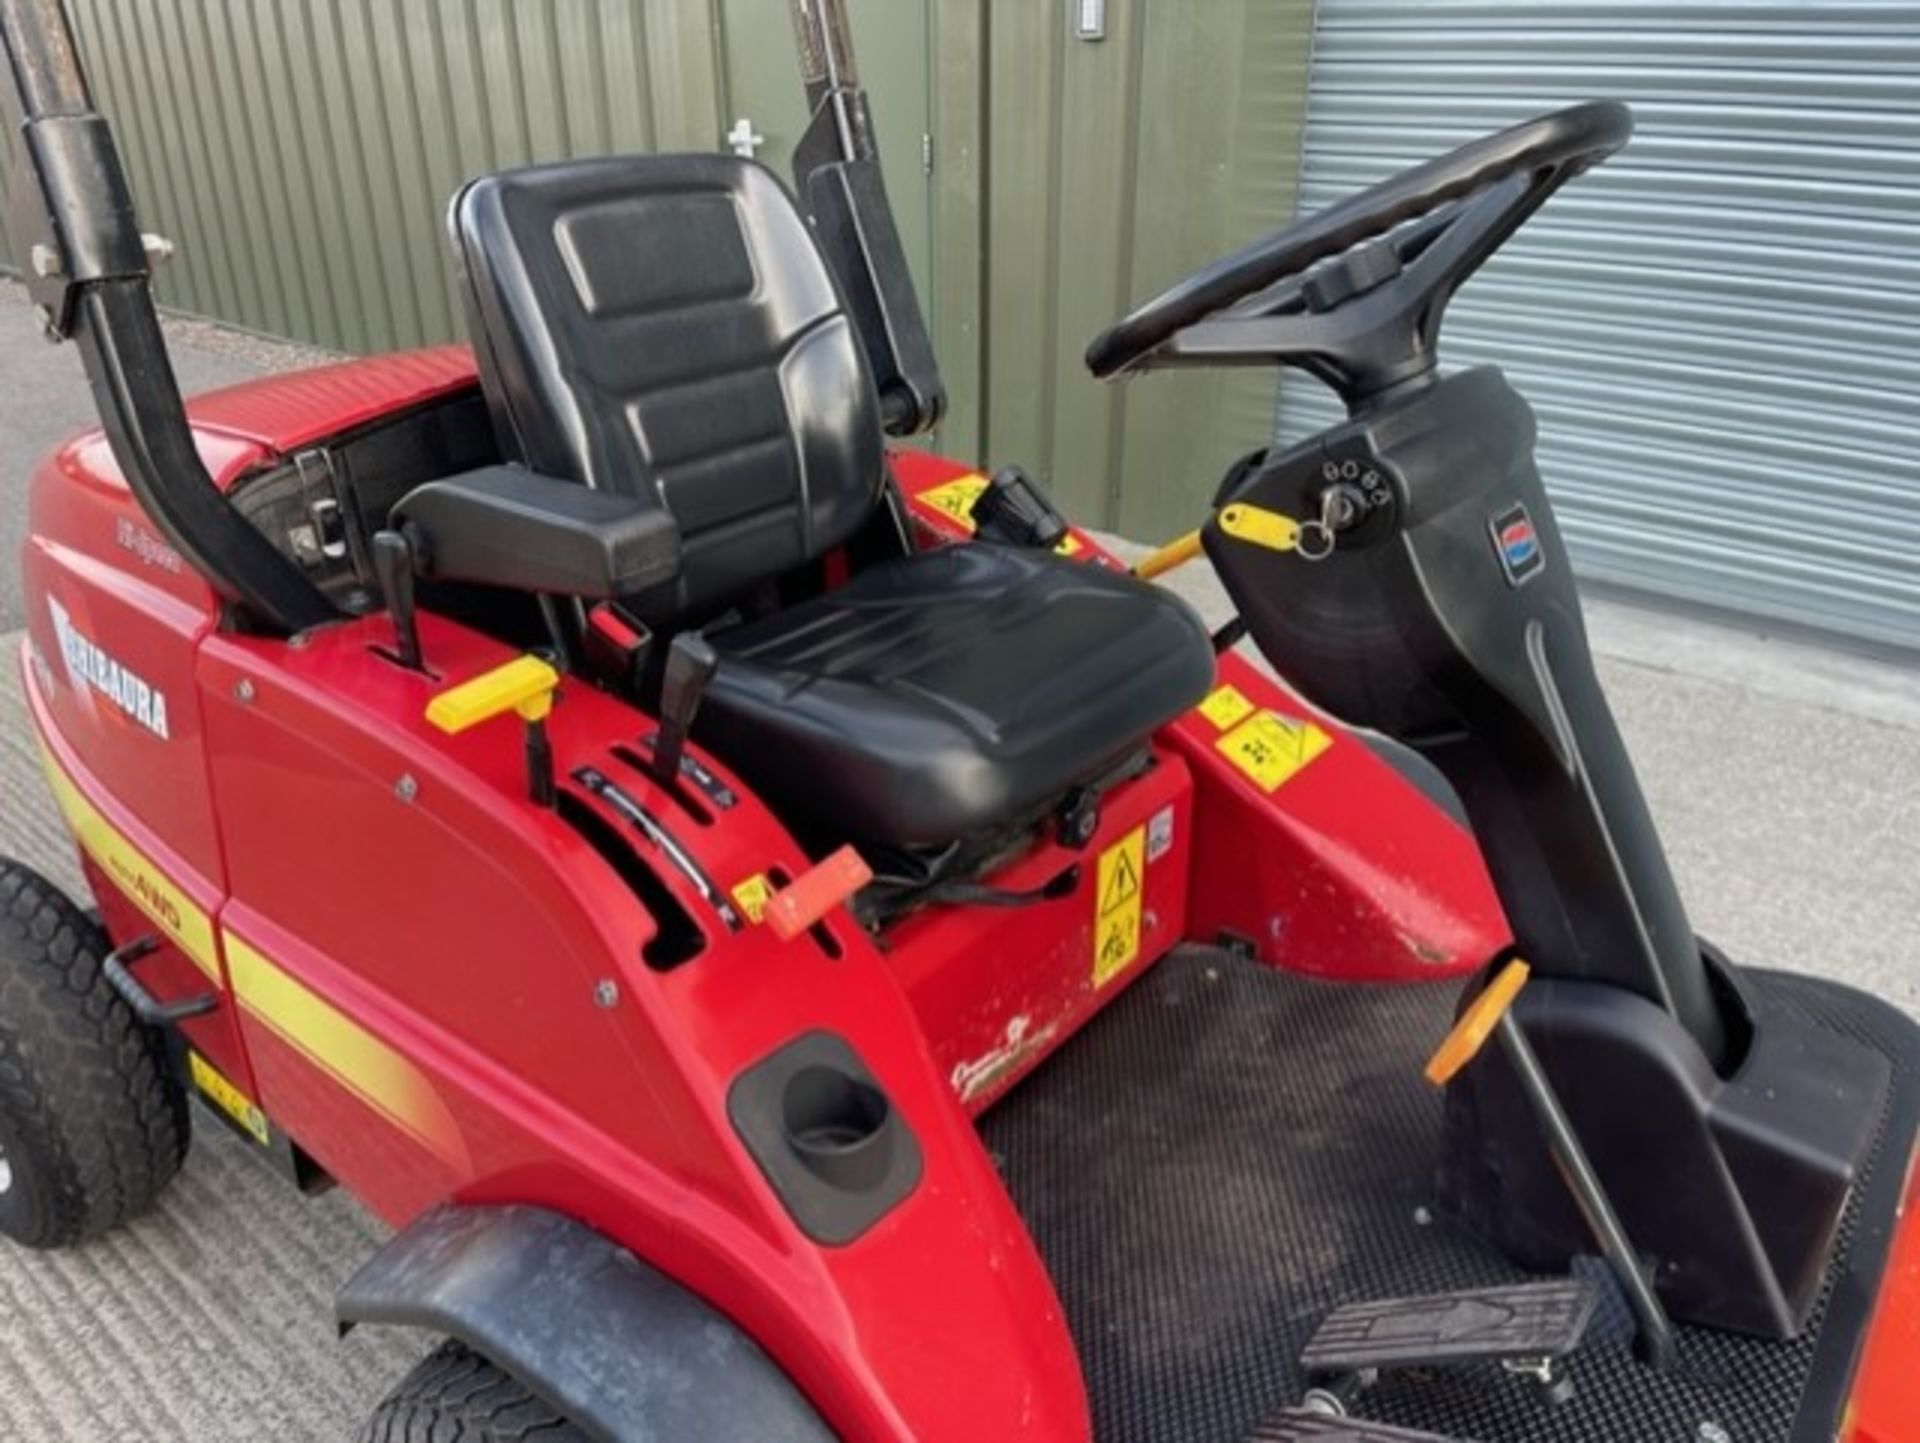 2018, SHIBAURA CM374 OUTFRONT MOWER WITH DECK & BLOWER - Image 11 of 13